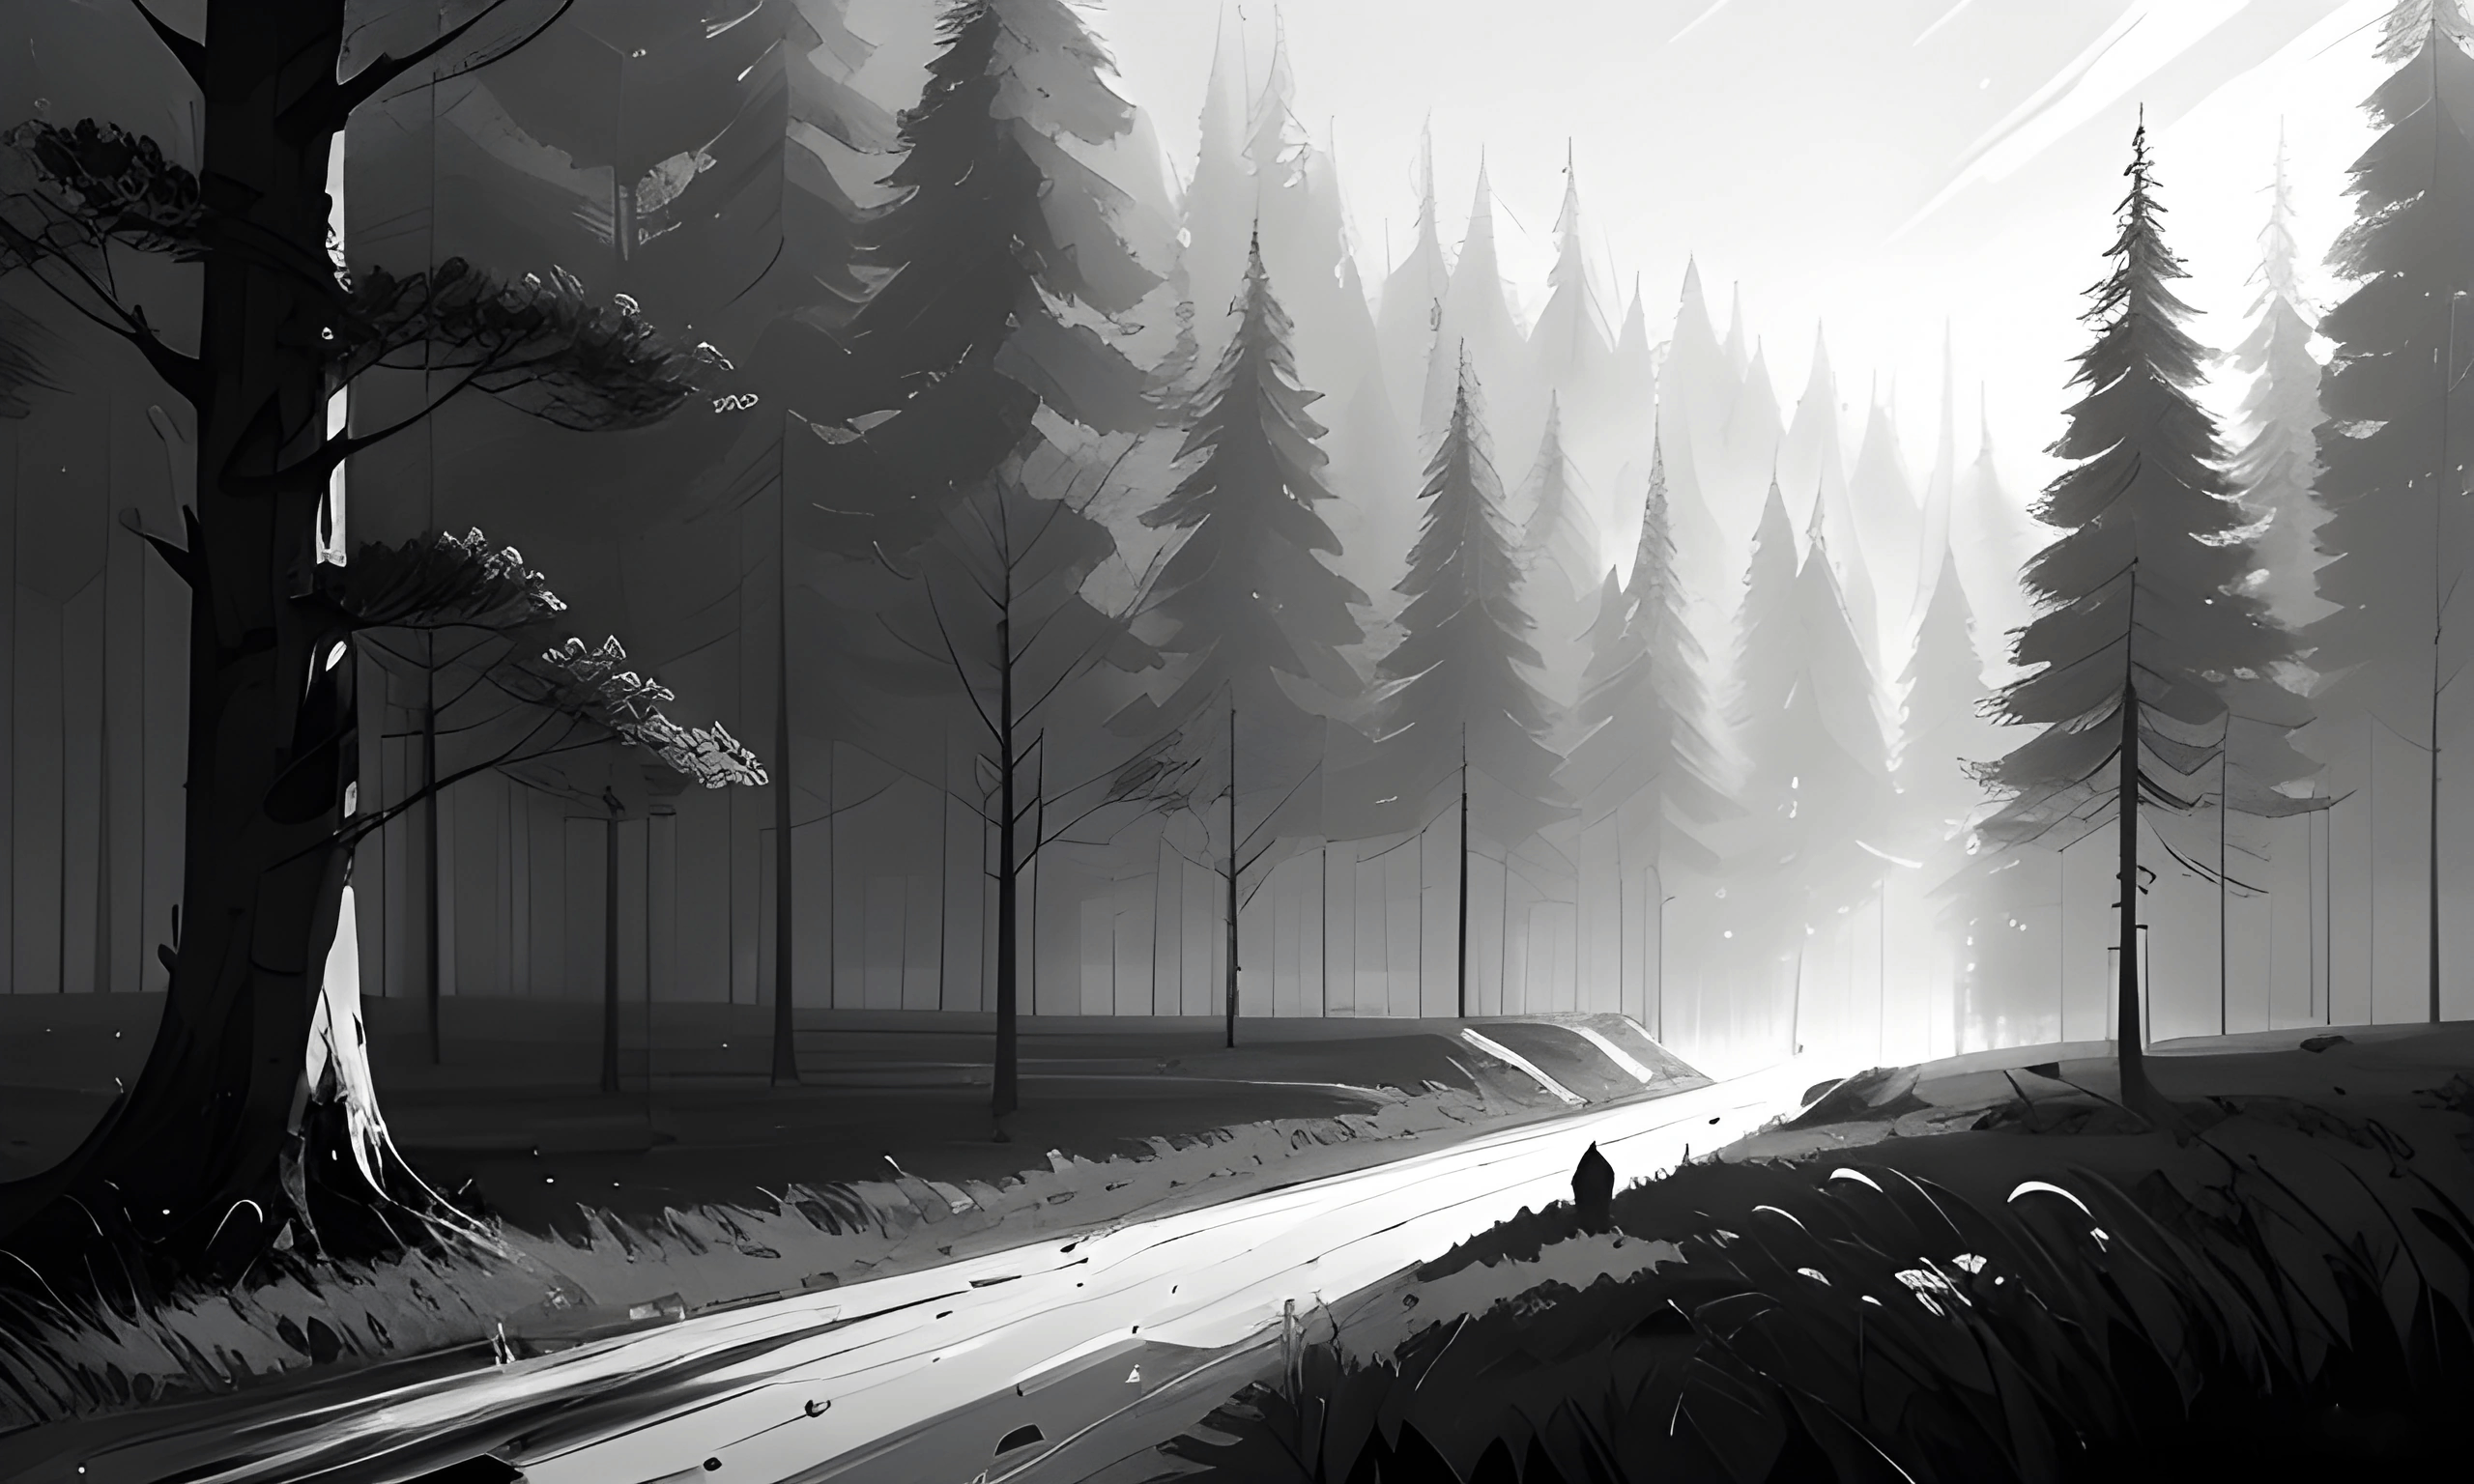 image of a man walking down a road in a forest